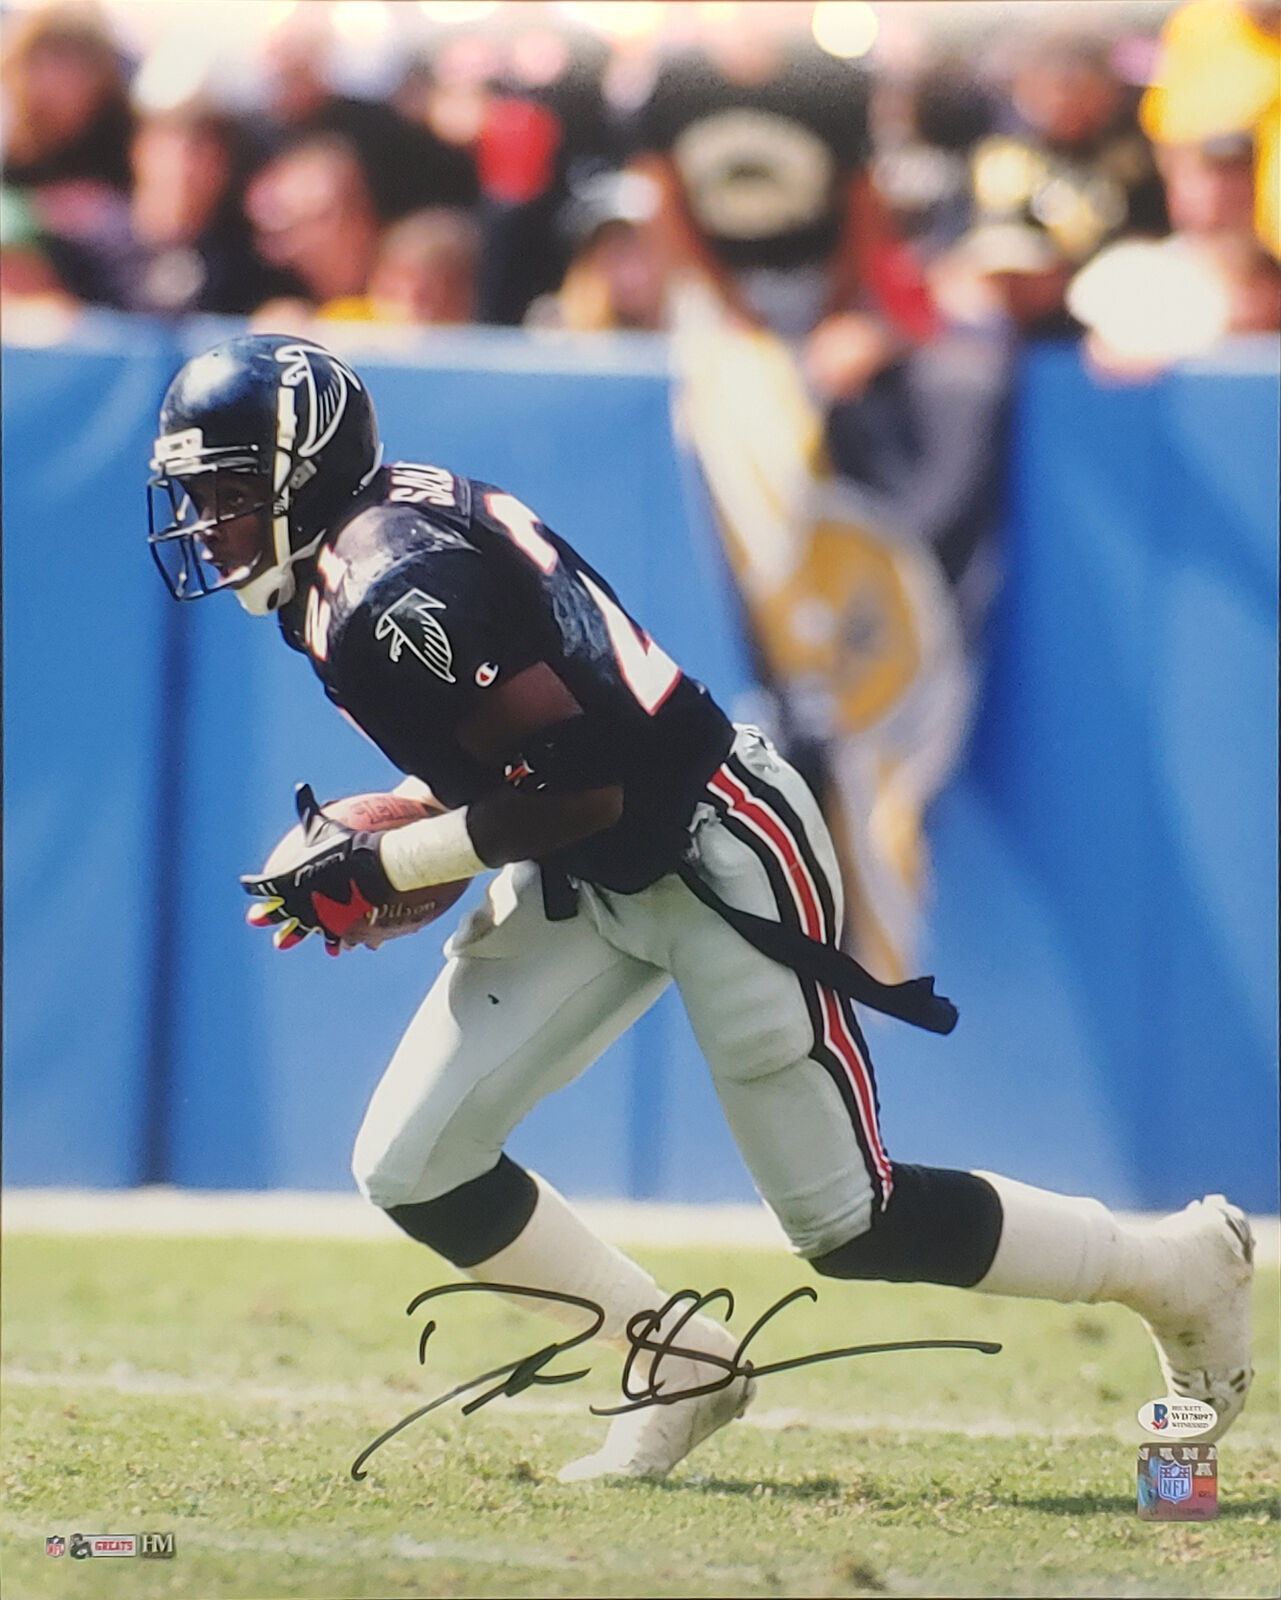 Falcons Deion Sanders Authentic Signed 16x20 Vertical Photo Poster painting BAS Witnessed